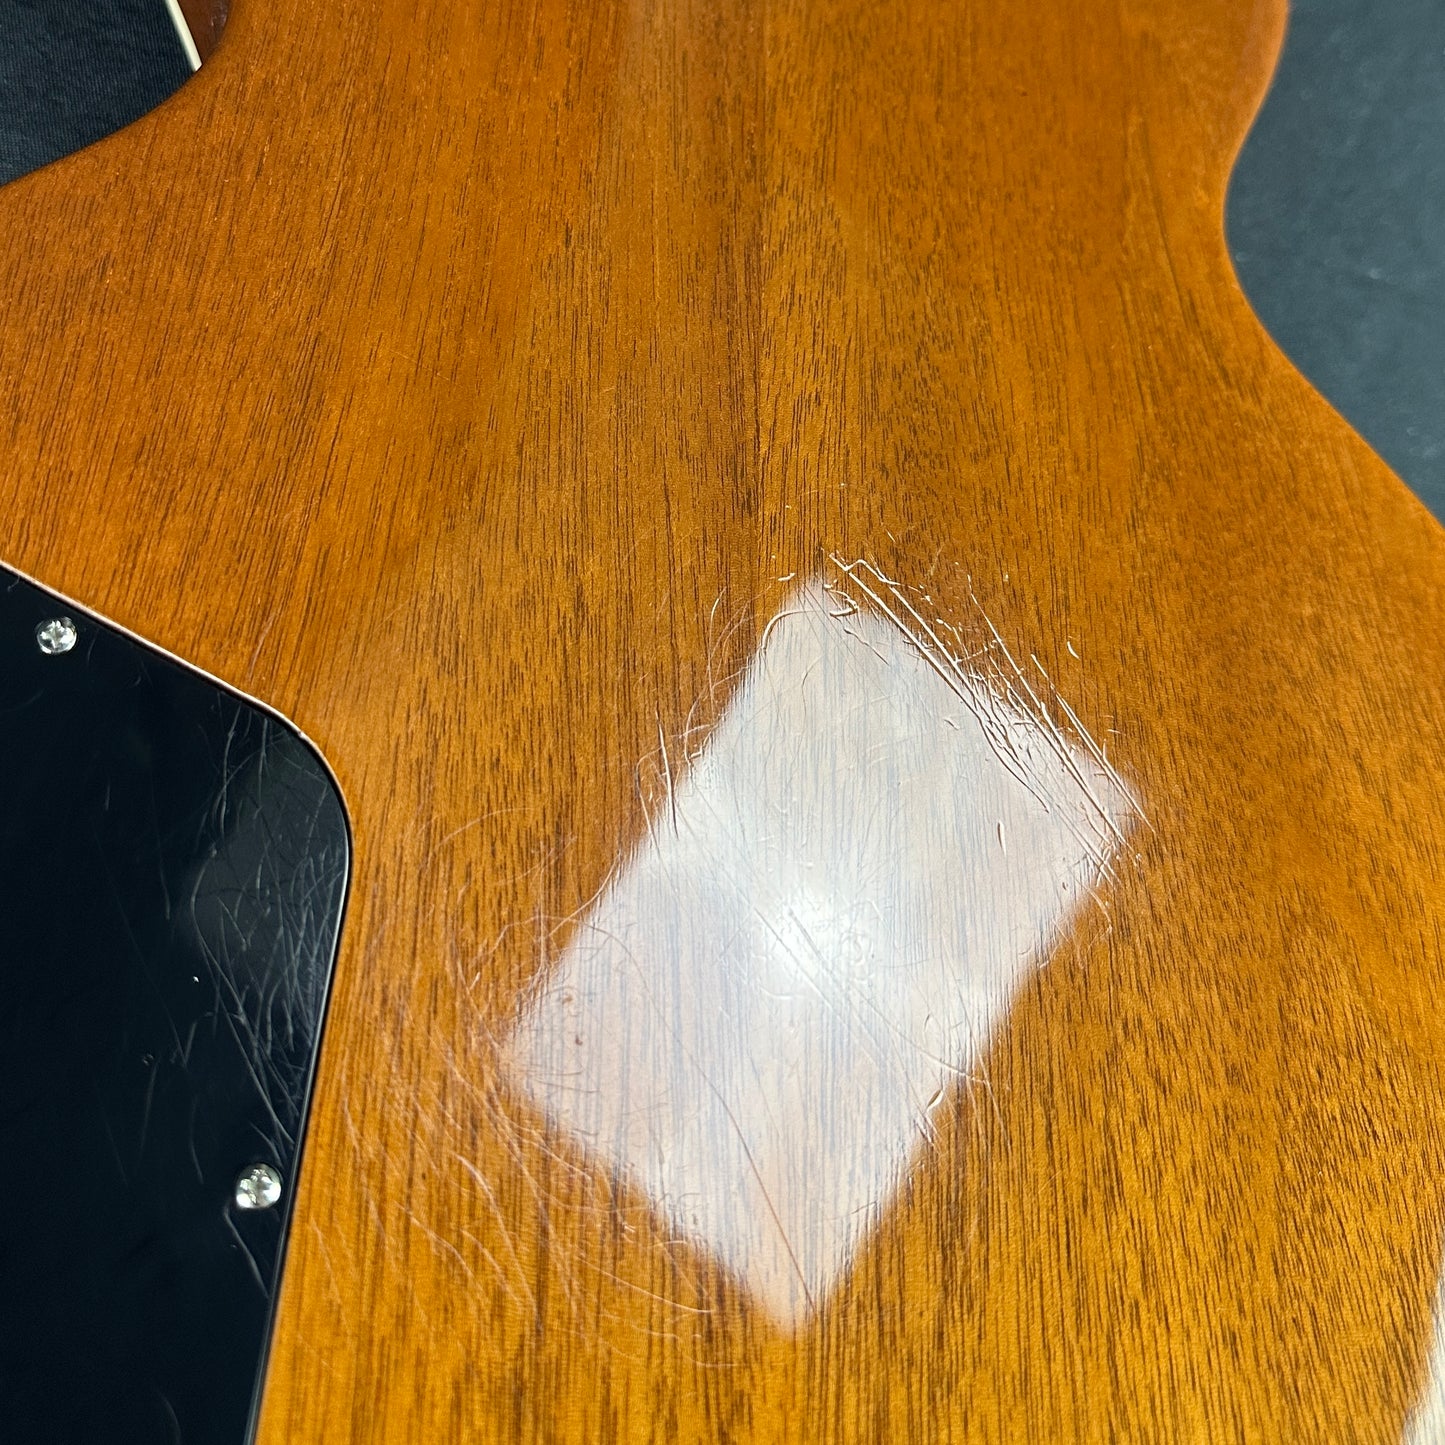 Scratches on back of body of Used 2020 Gibson Les Paul Standard 50's Goldtop.